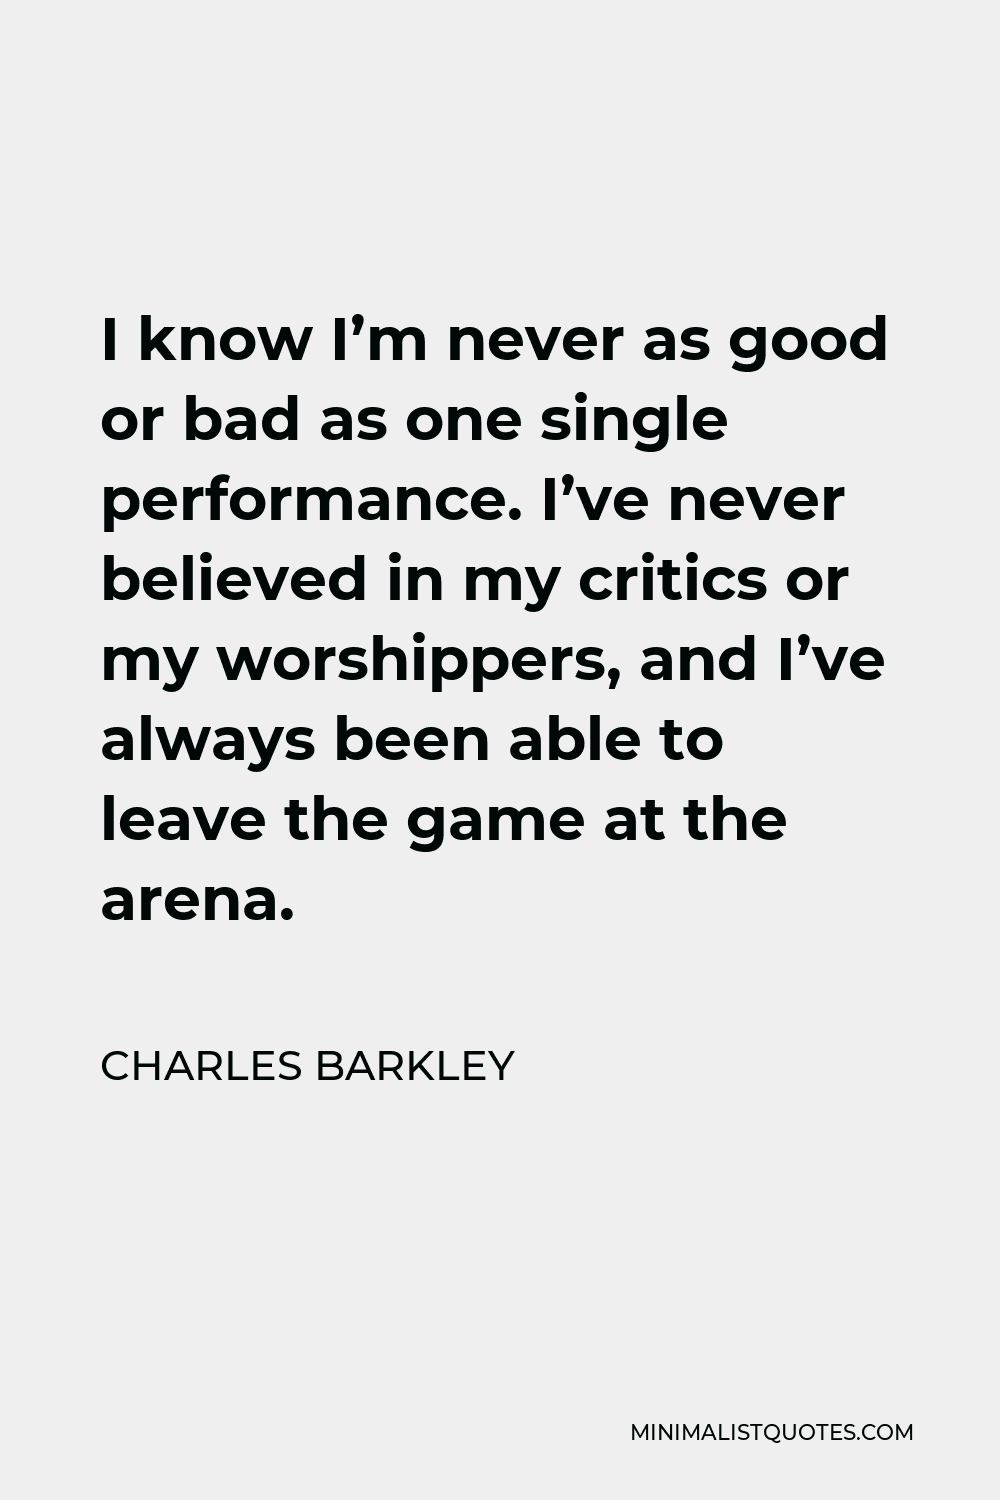 Charles Barkley Quote - I know I’m never as good or bad as one single performance. I’ve never believed in my critics or my worshippers, and I’ve always been able to leave the game at the arena.